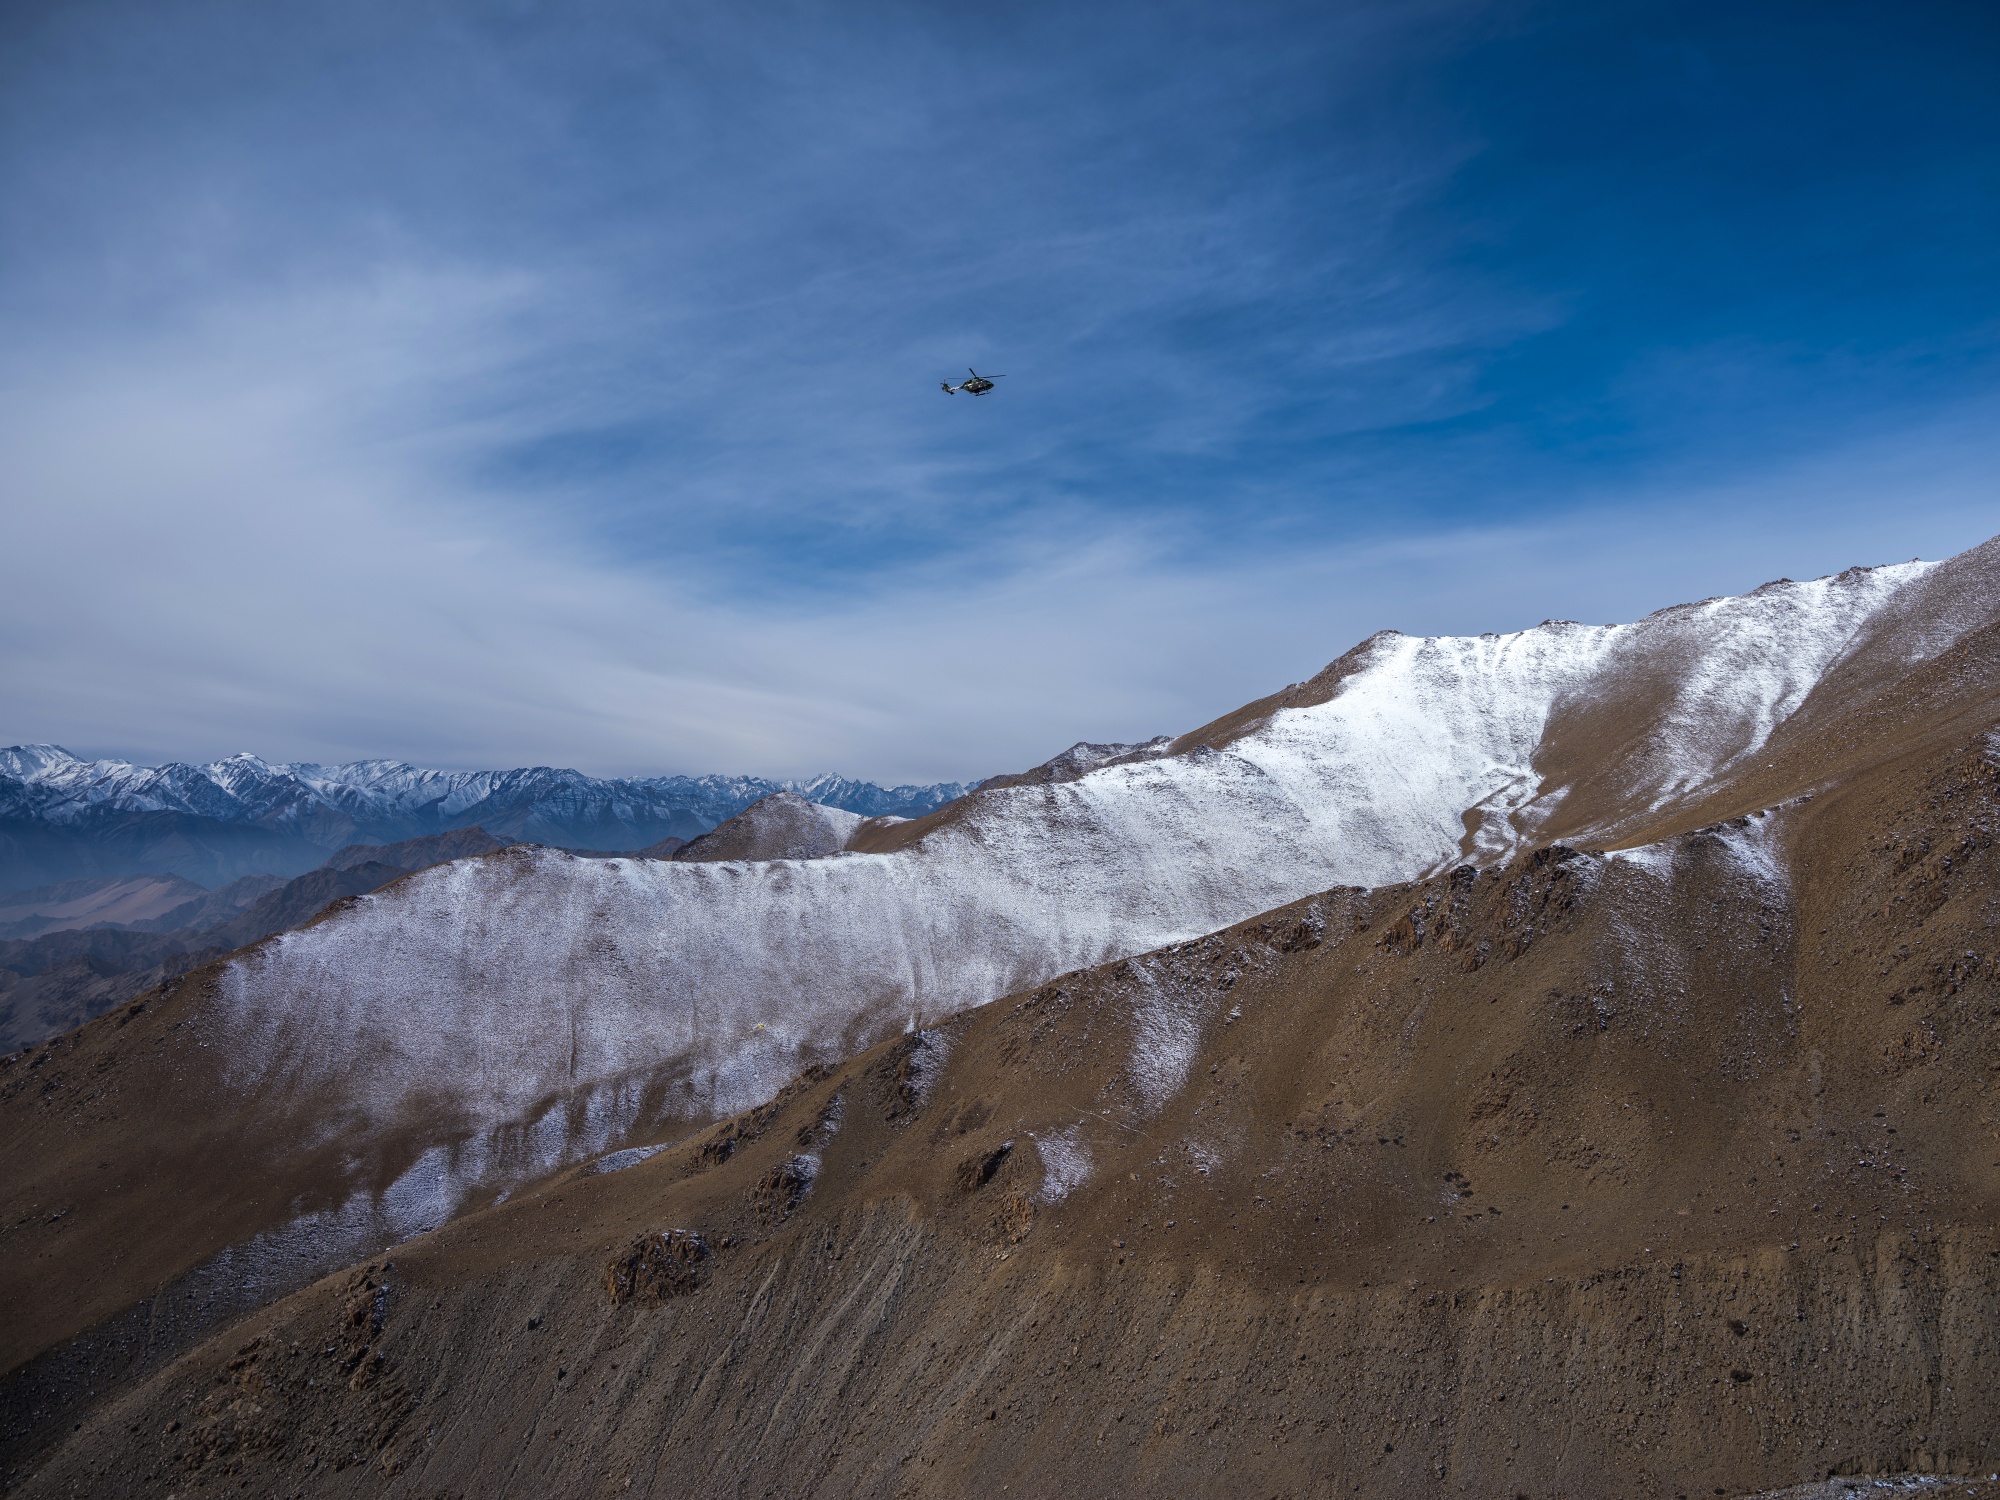 An Indian Armed Forces&nbsp;helicopter flies near the Khardung La pass in Ladakh, India, on Nov. 13, 2019.